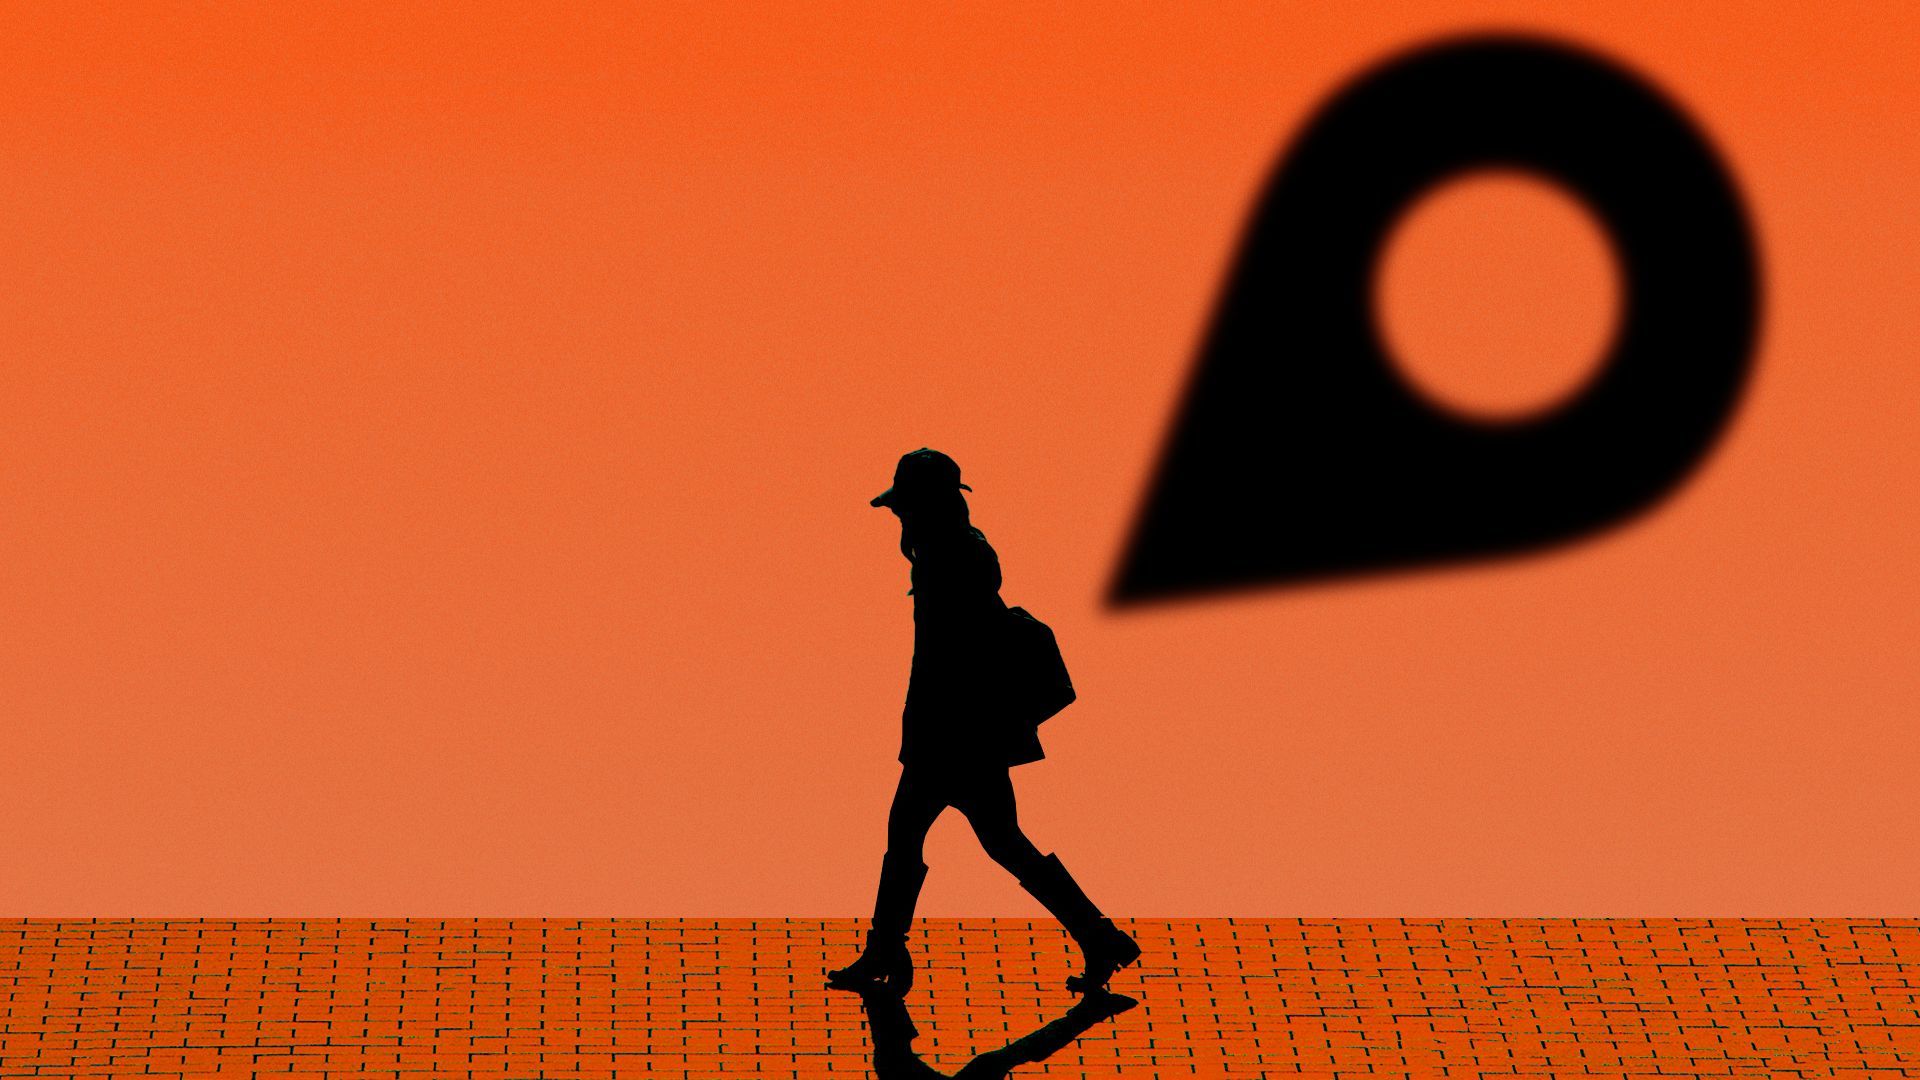 Illustration of a silhouetted person walking with a large, shadowy location pin following them.